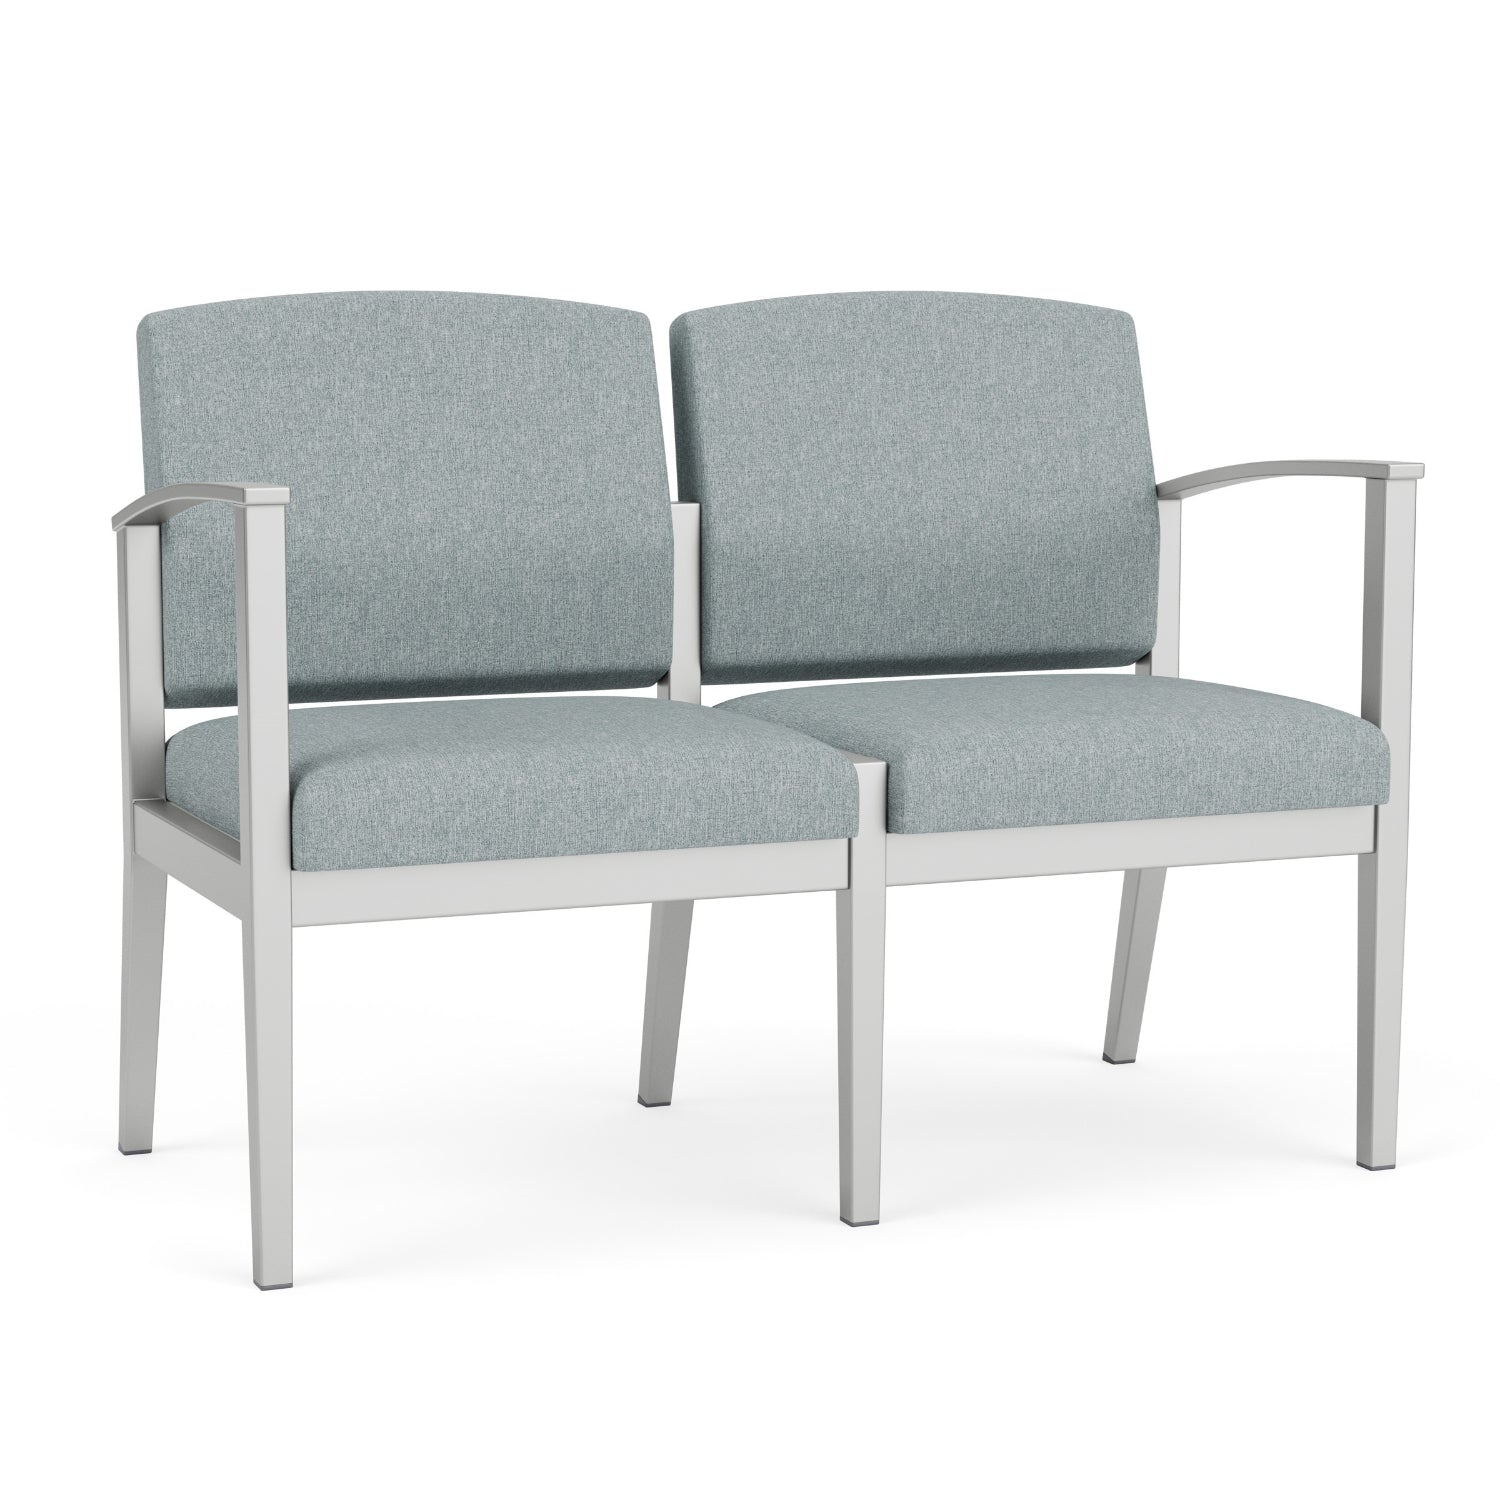 Amherst Steel Collection Reception Seating, 2-Seat Sofa, Healthcare Vinyl Upholstery, FREE SHIPPING